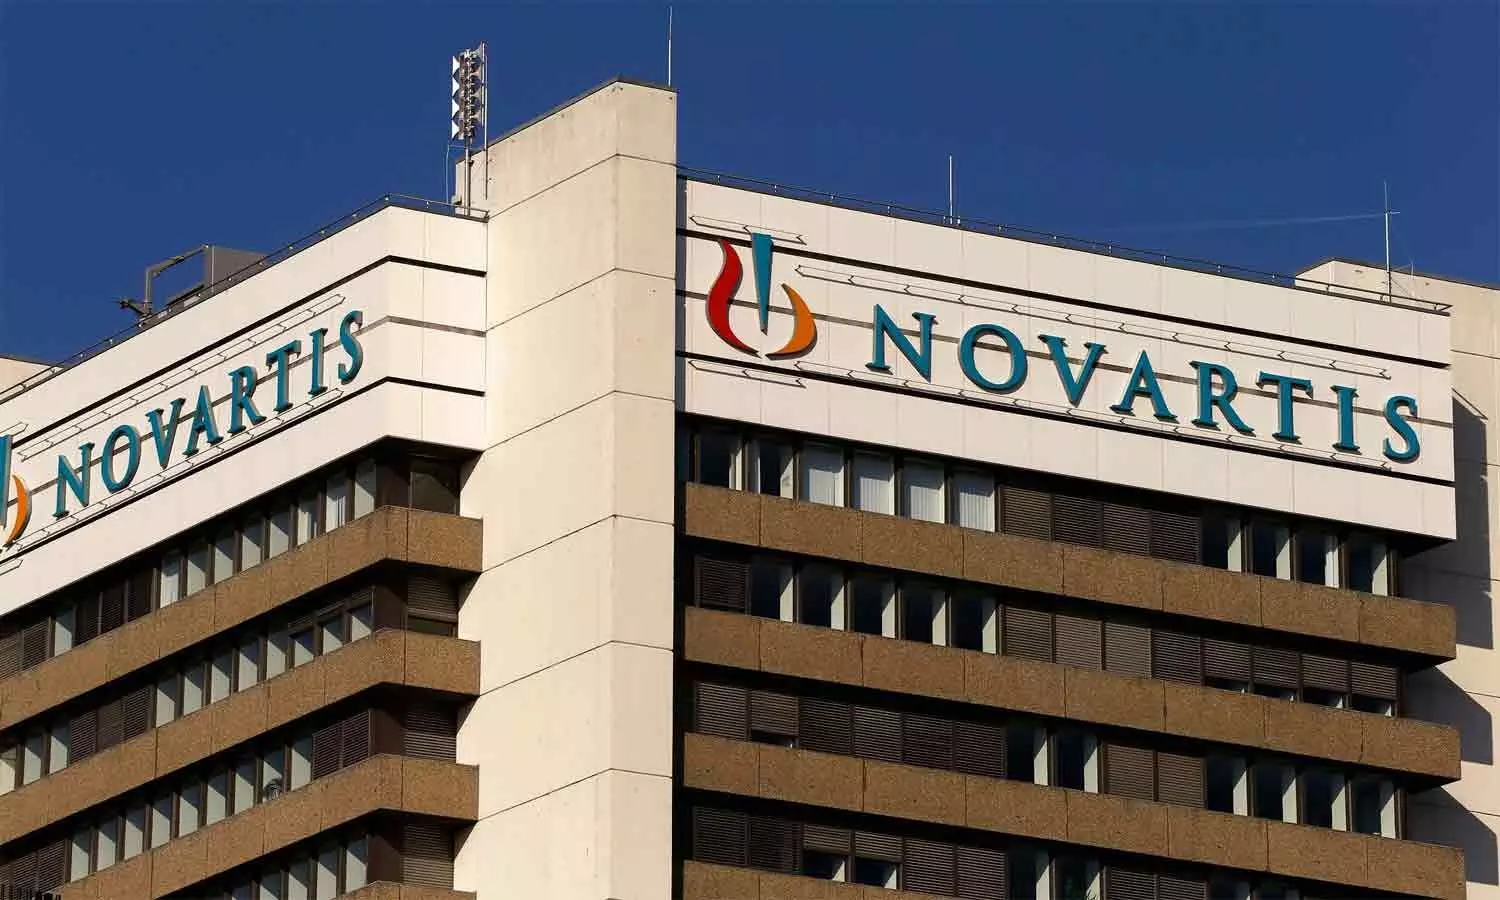 Novartis pushes forward with Covid drug after positive trial: Bloomberg